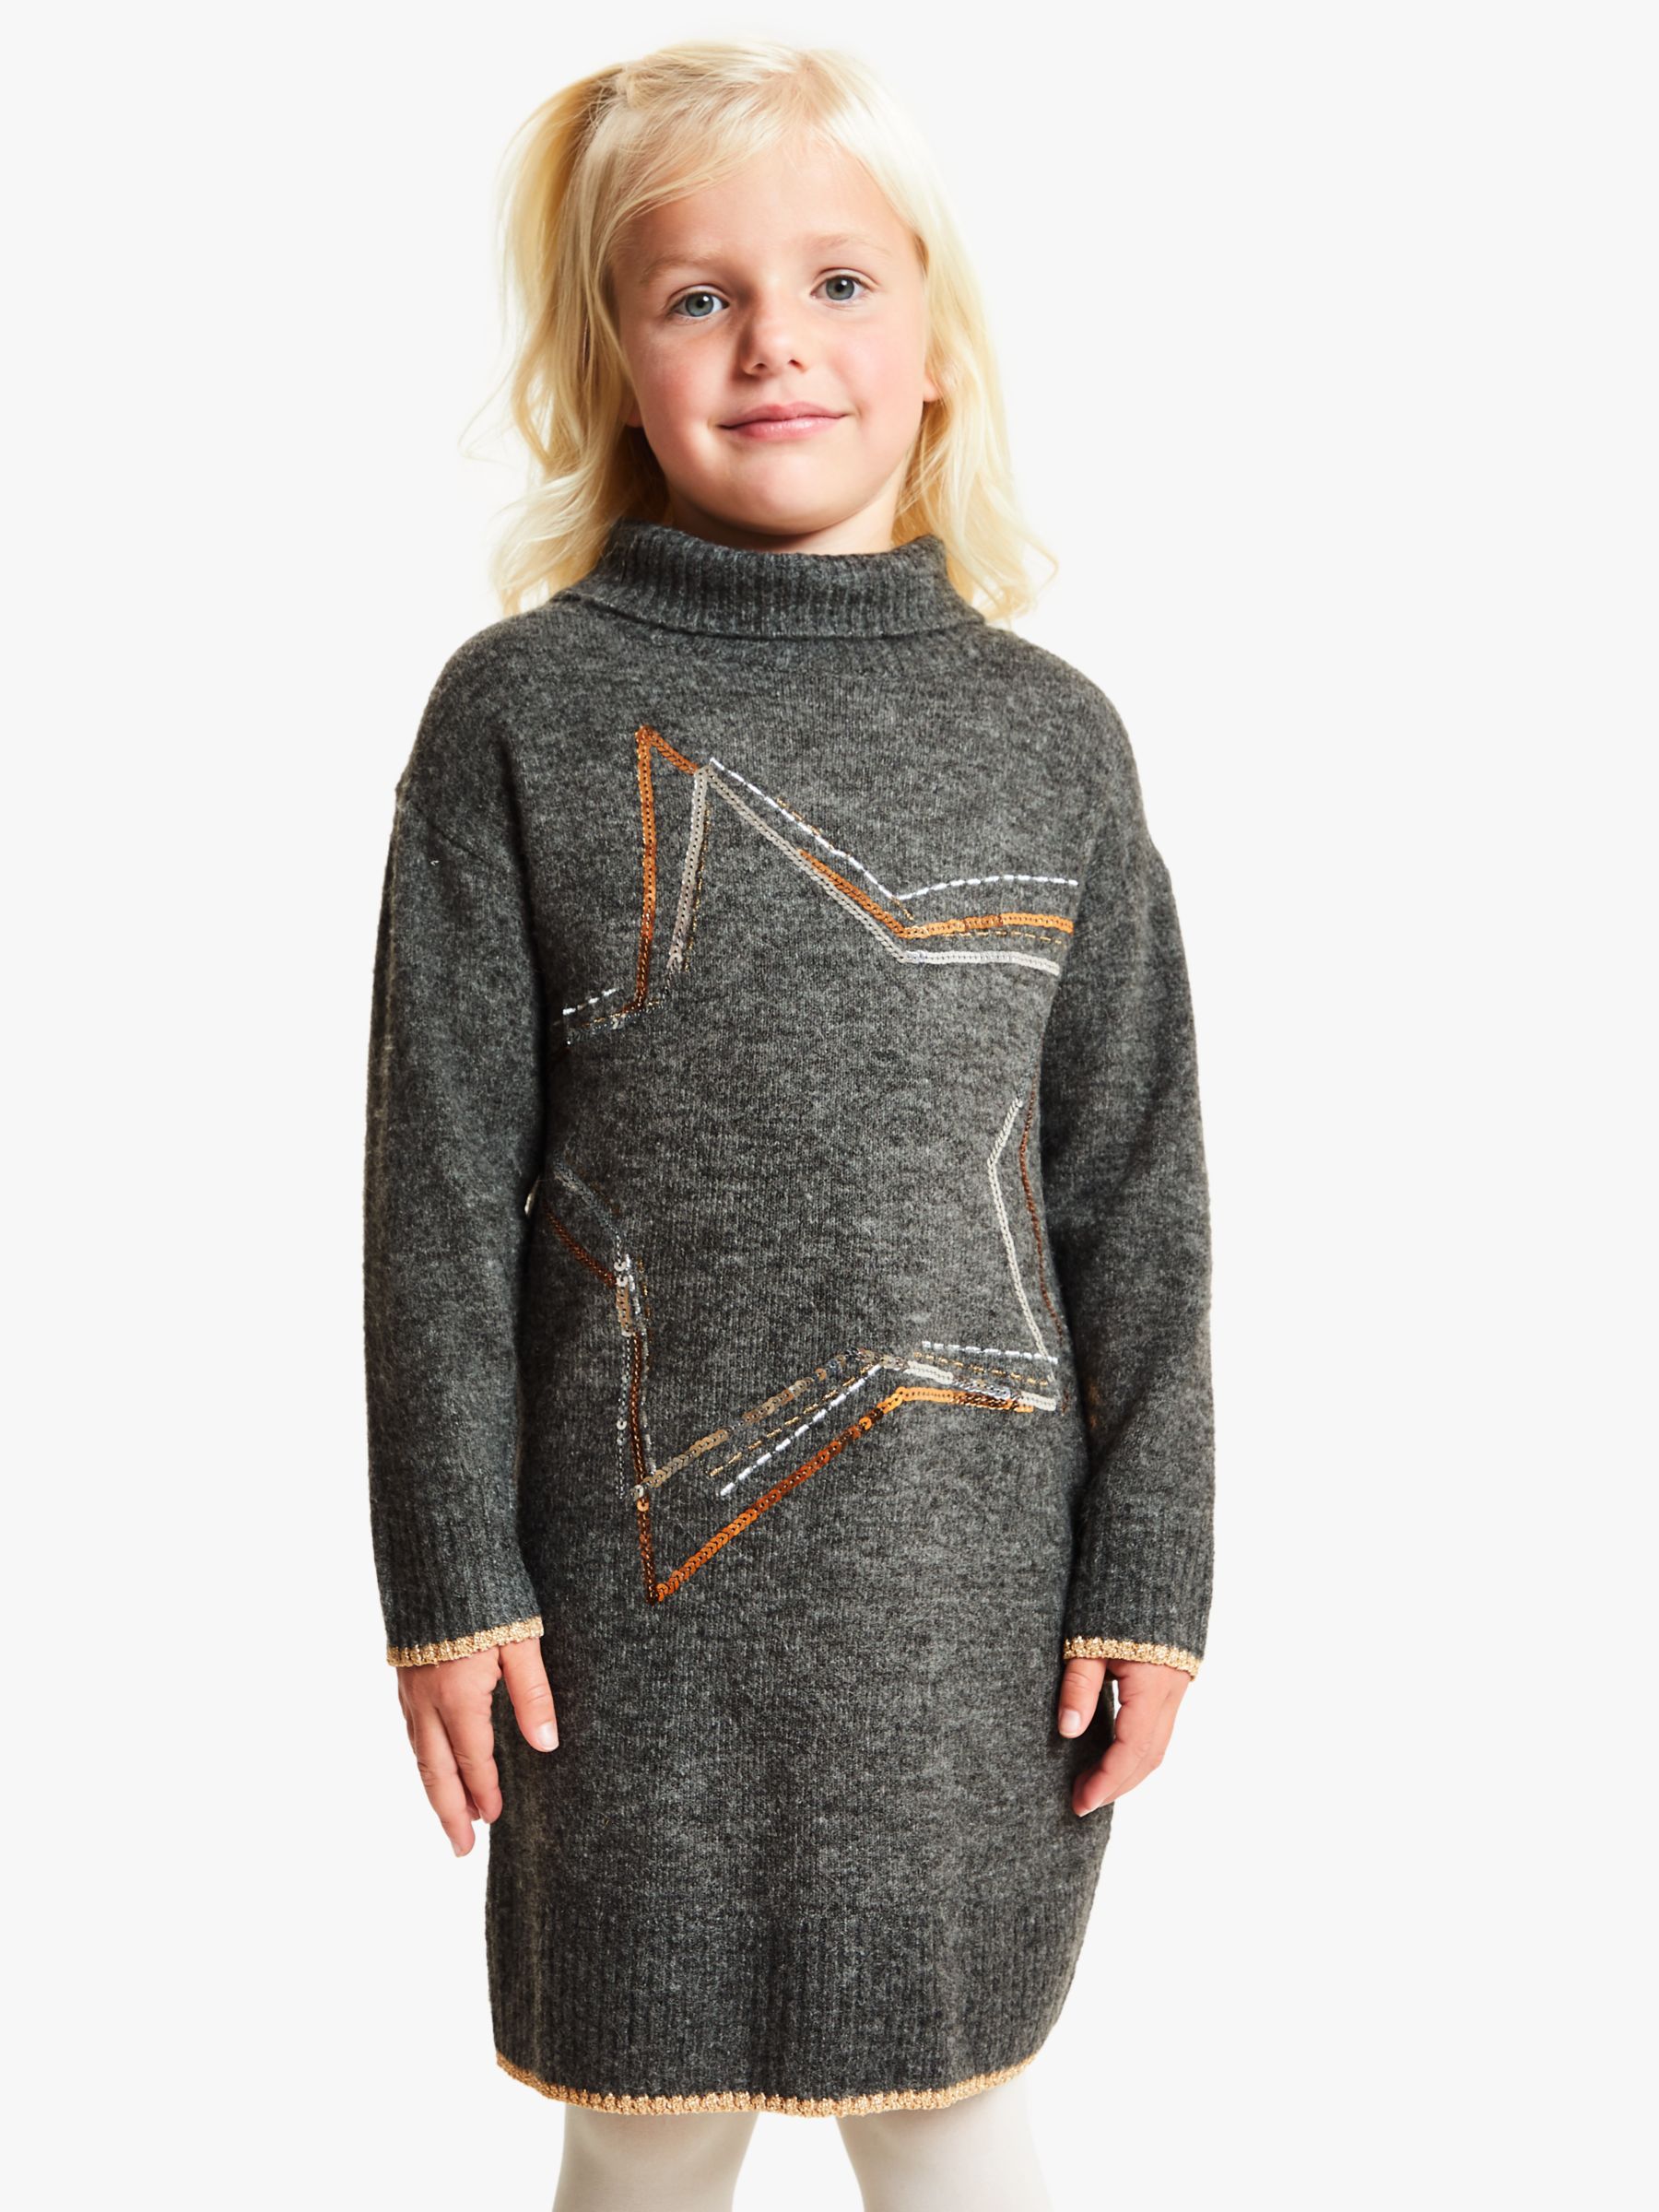 Image of John Lewis and Partners Girls Sequin Star Knit Dress Grey